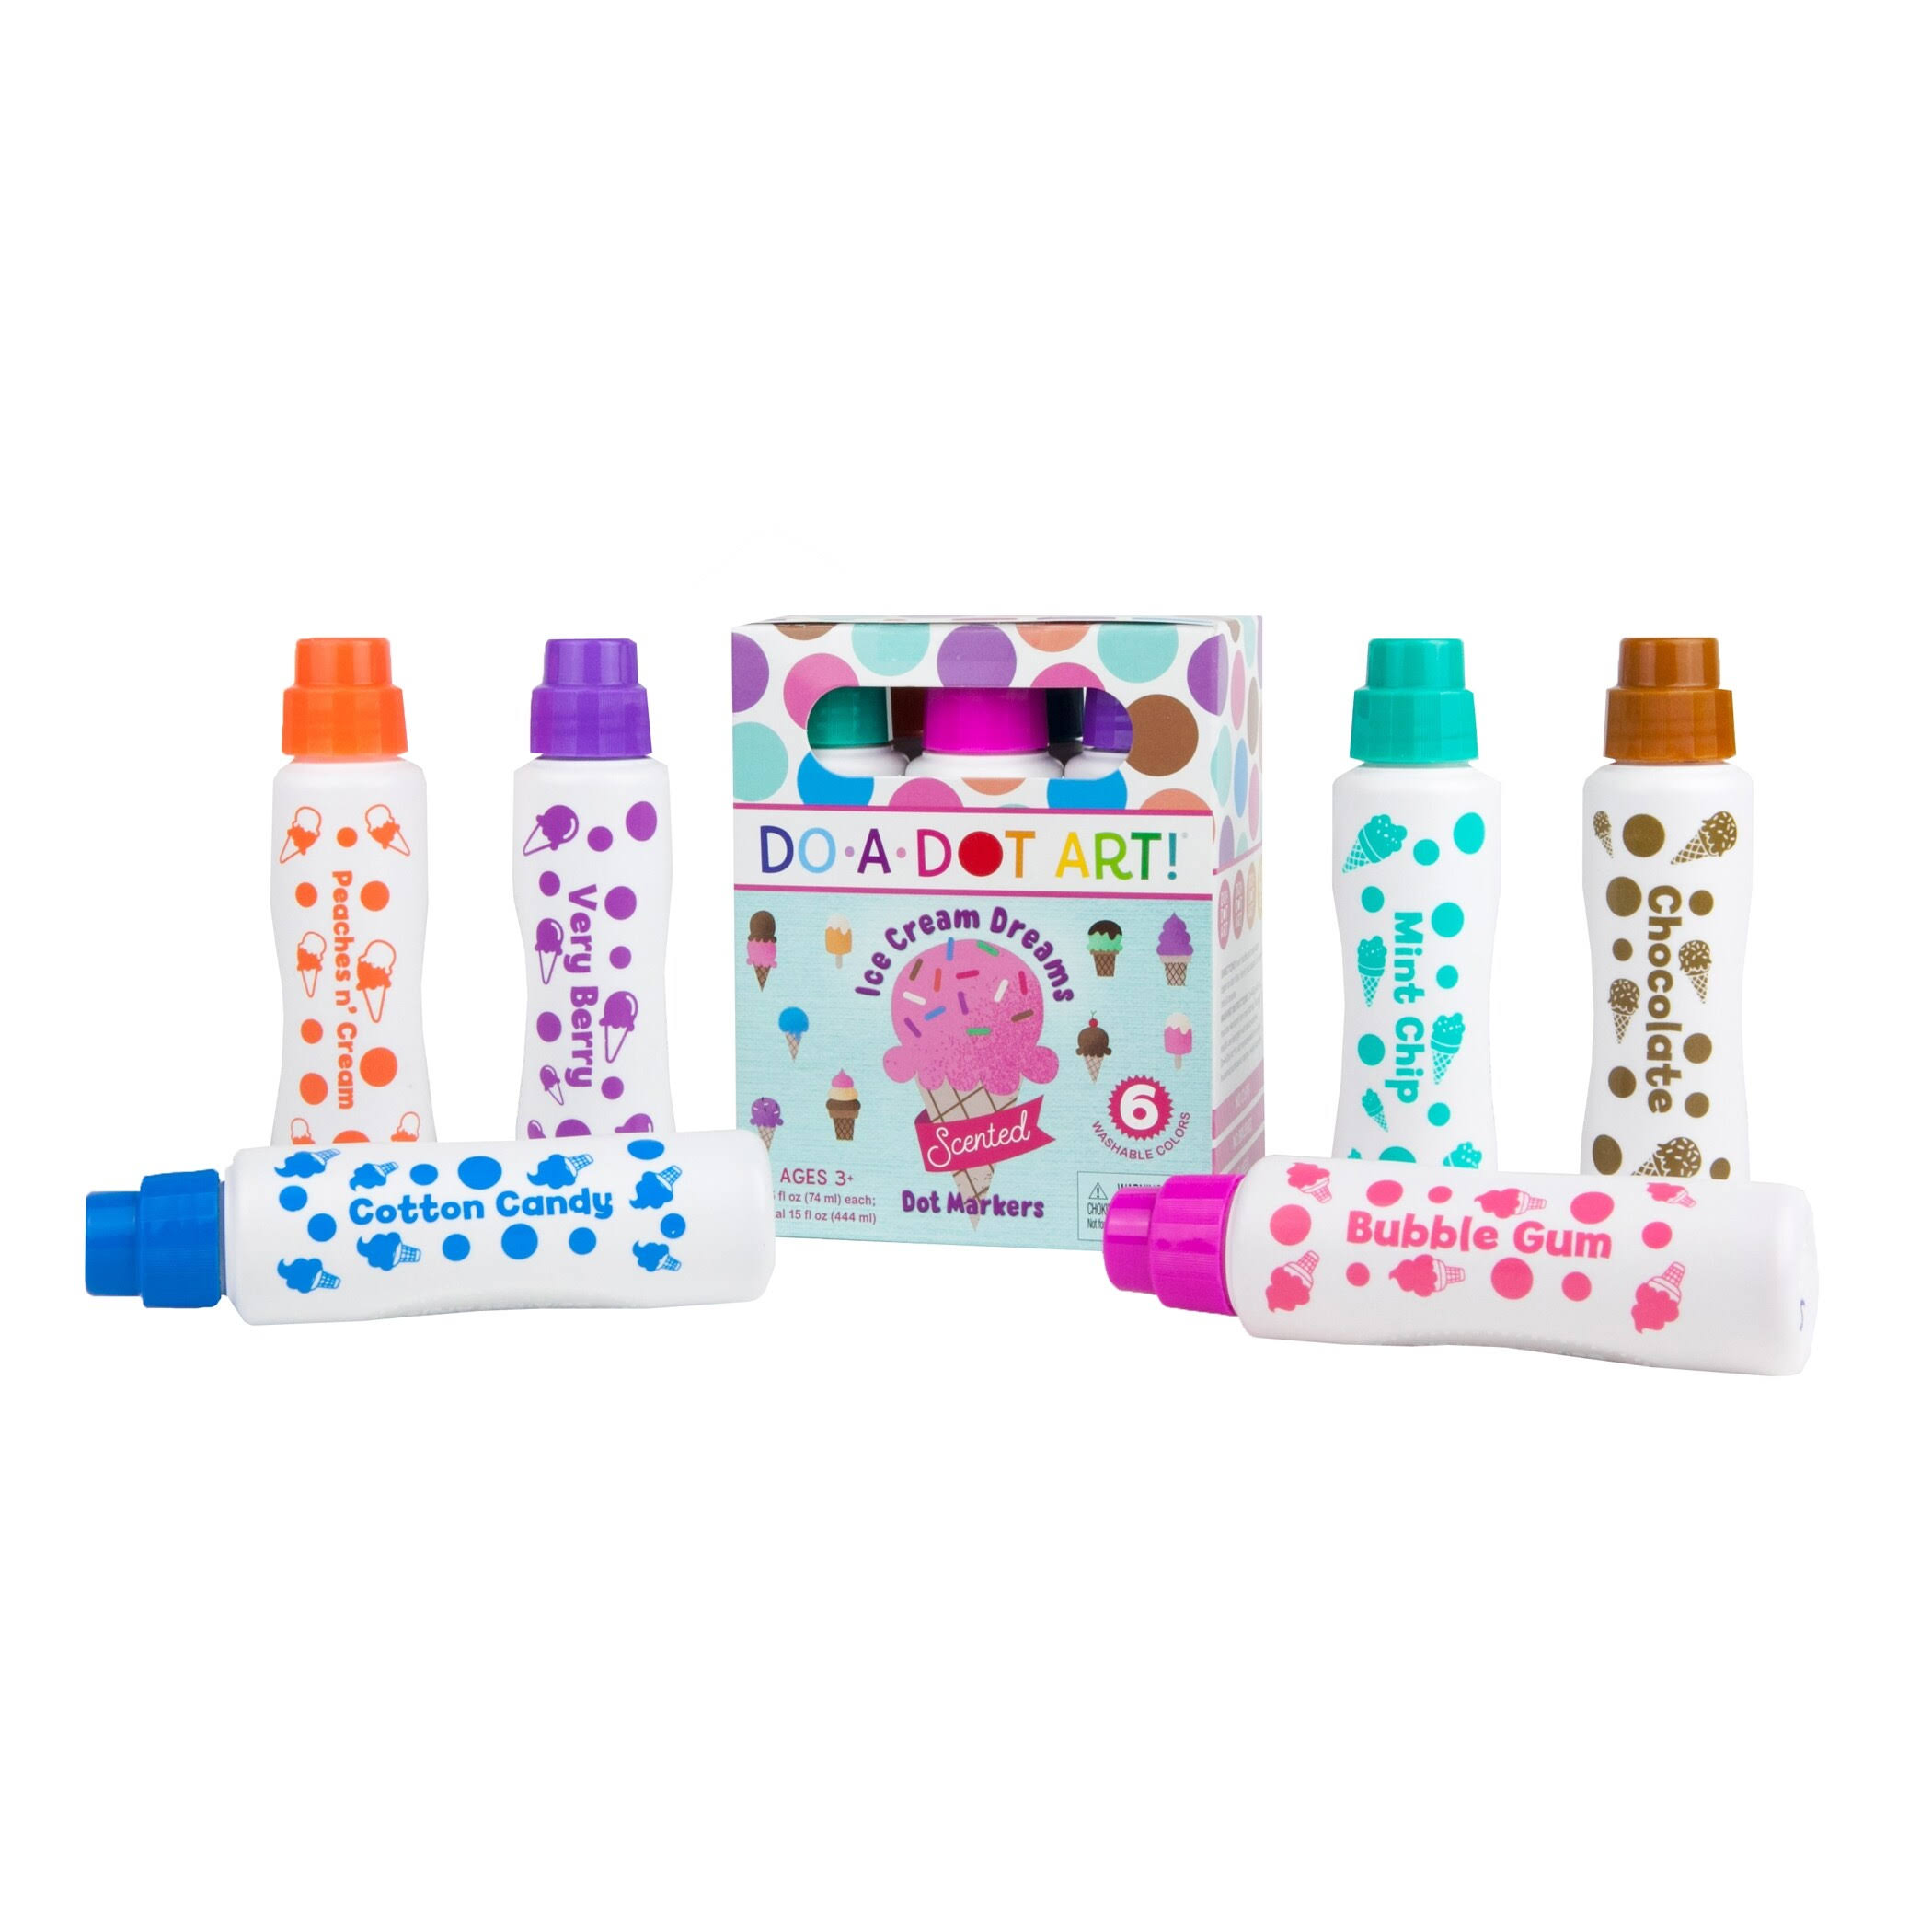 Do-A-Dot Art Ice Cream Scented Dot Markers (Set of 6)